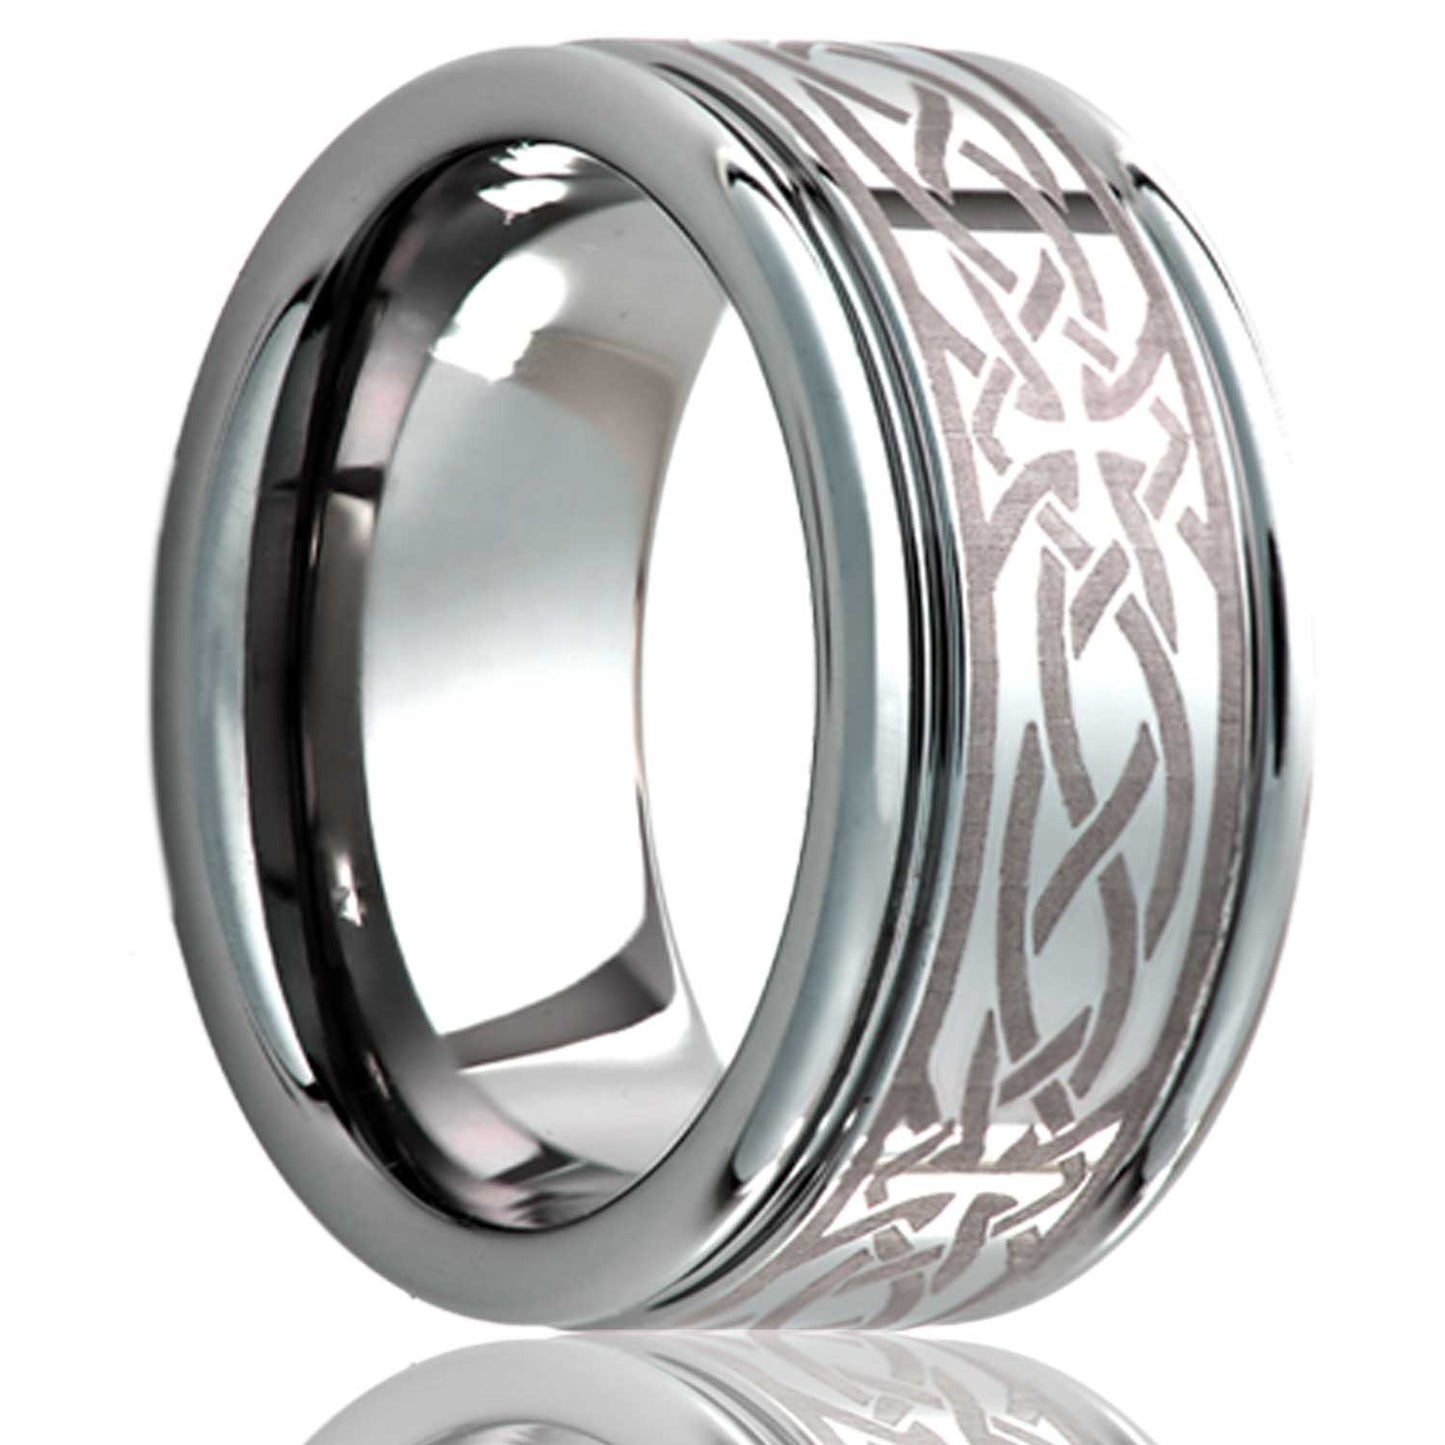 A celtic cross knot grooved tungsten wedding band displayed on a neutral white background.